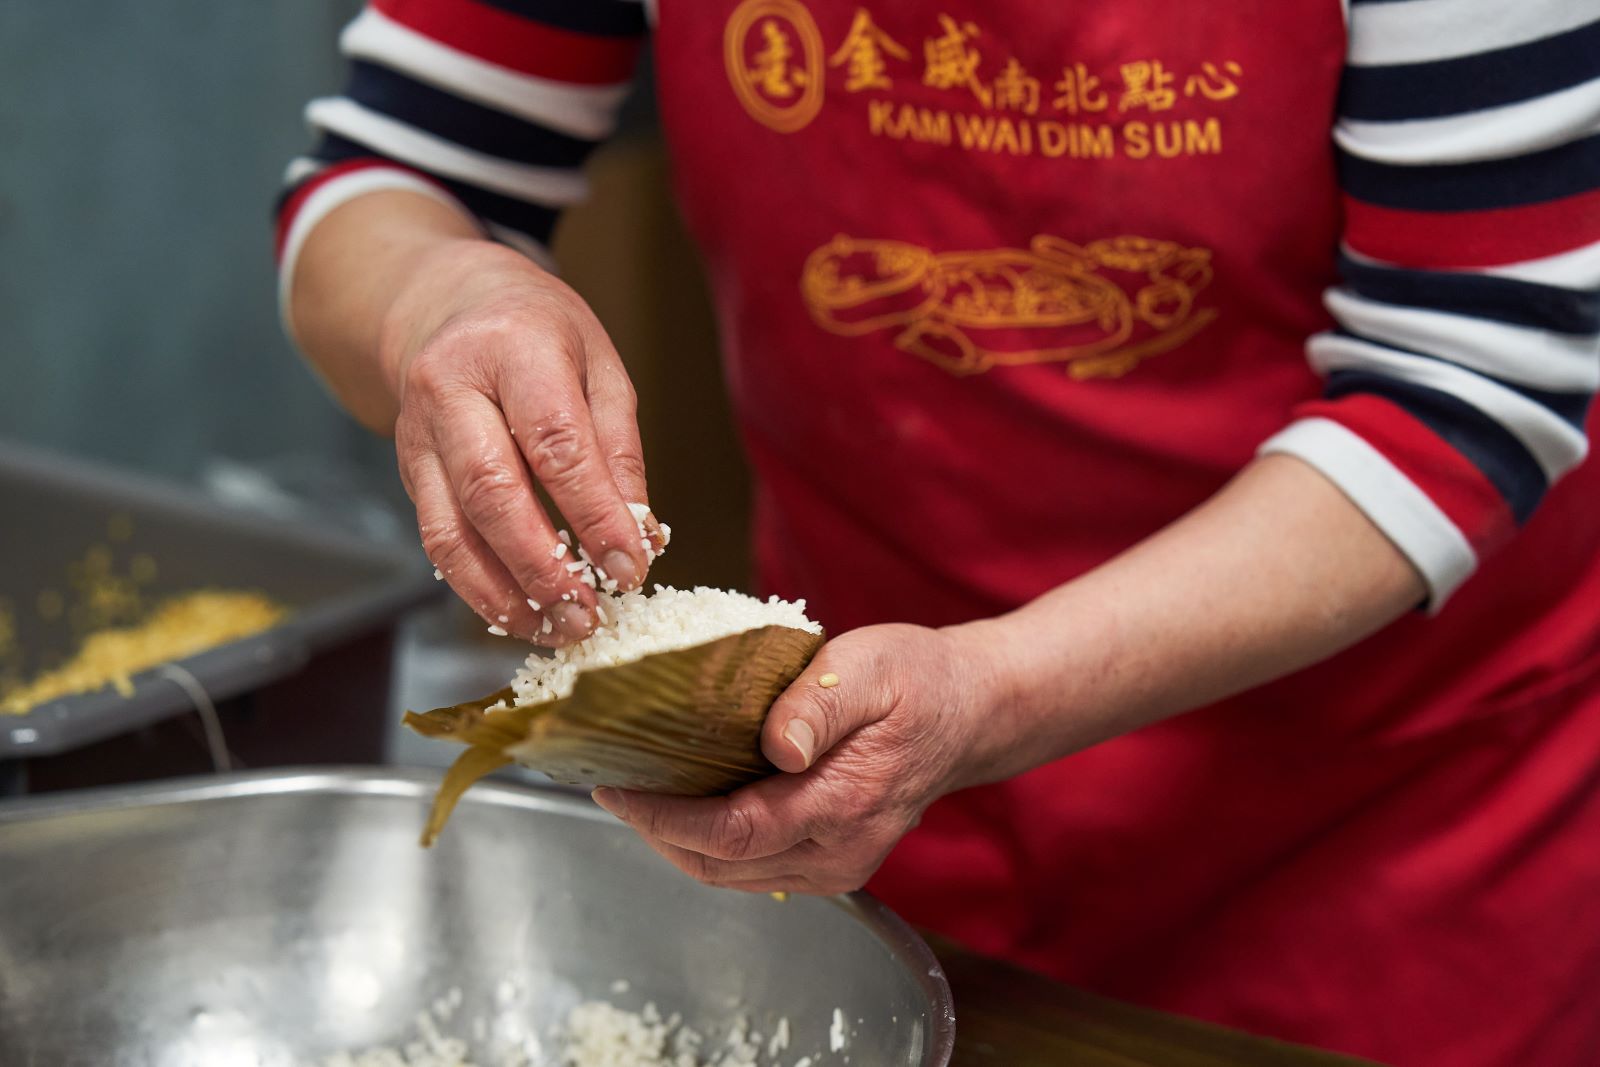 The hands of Xiao-Hong Wu stuff folded bamboo leaves with glutinous rice. Wu is wearing a red apron that reads ‘Kam Wai Dim Sum’ in yellow letters. Only Wu’s arms and apron are visible in this shot.